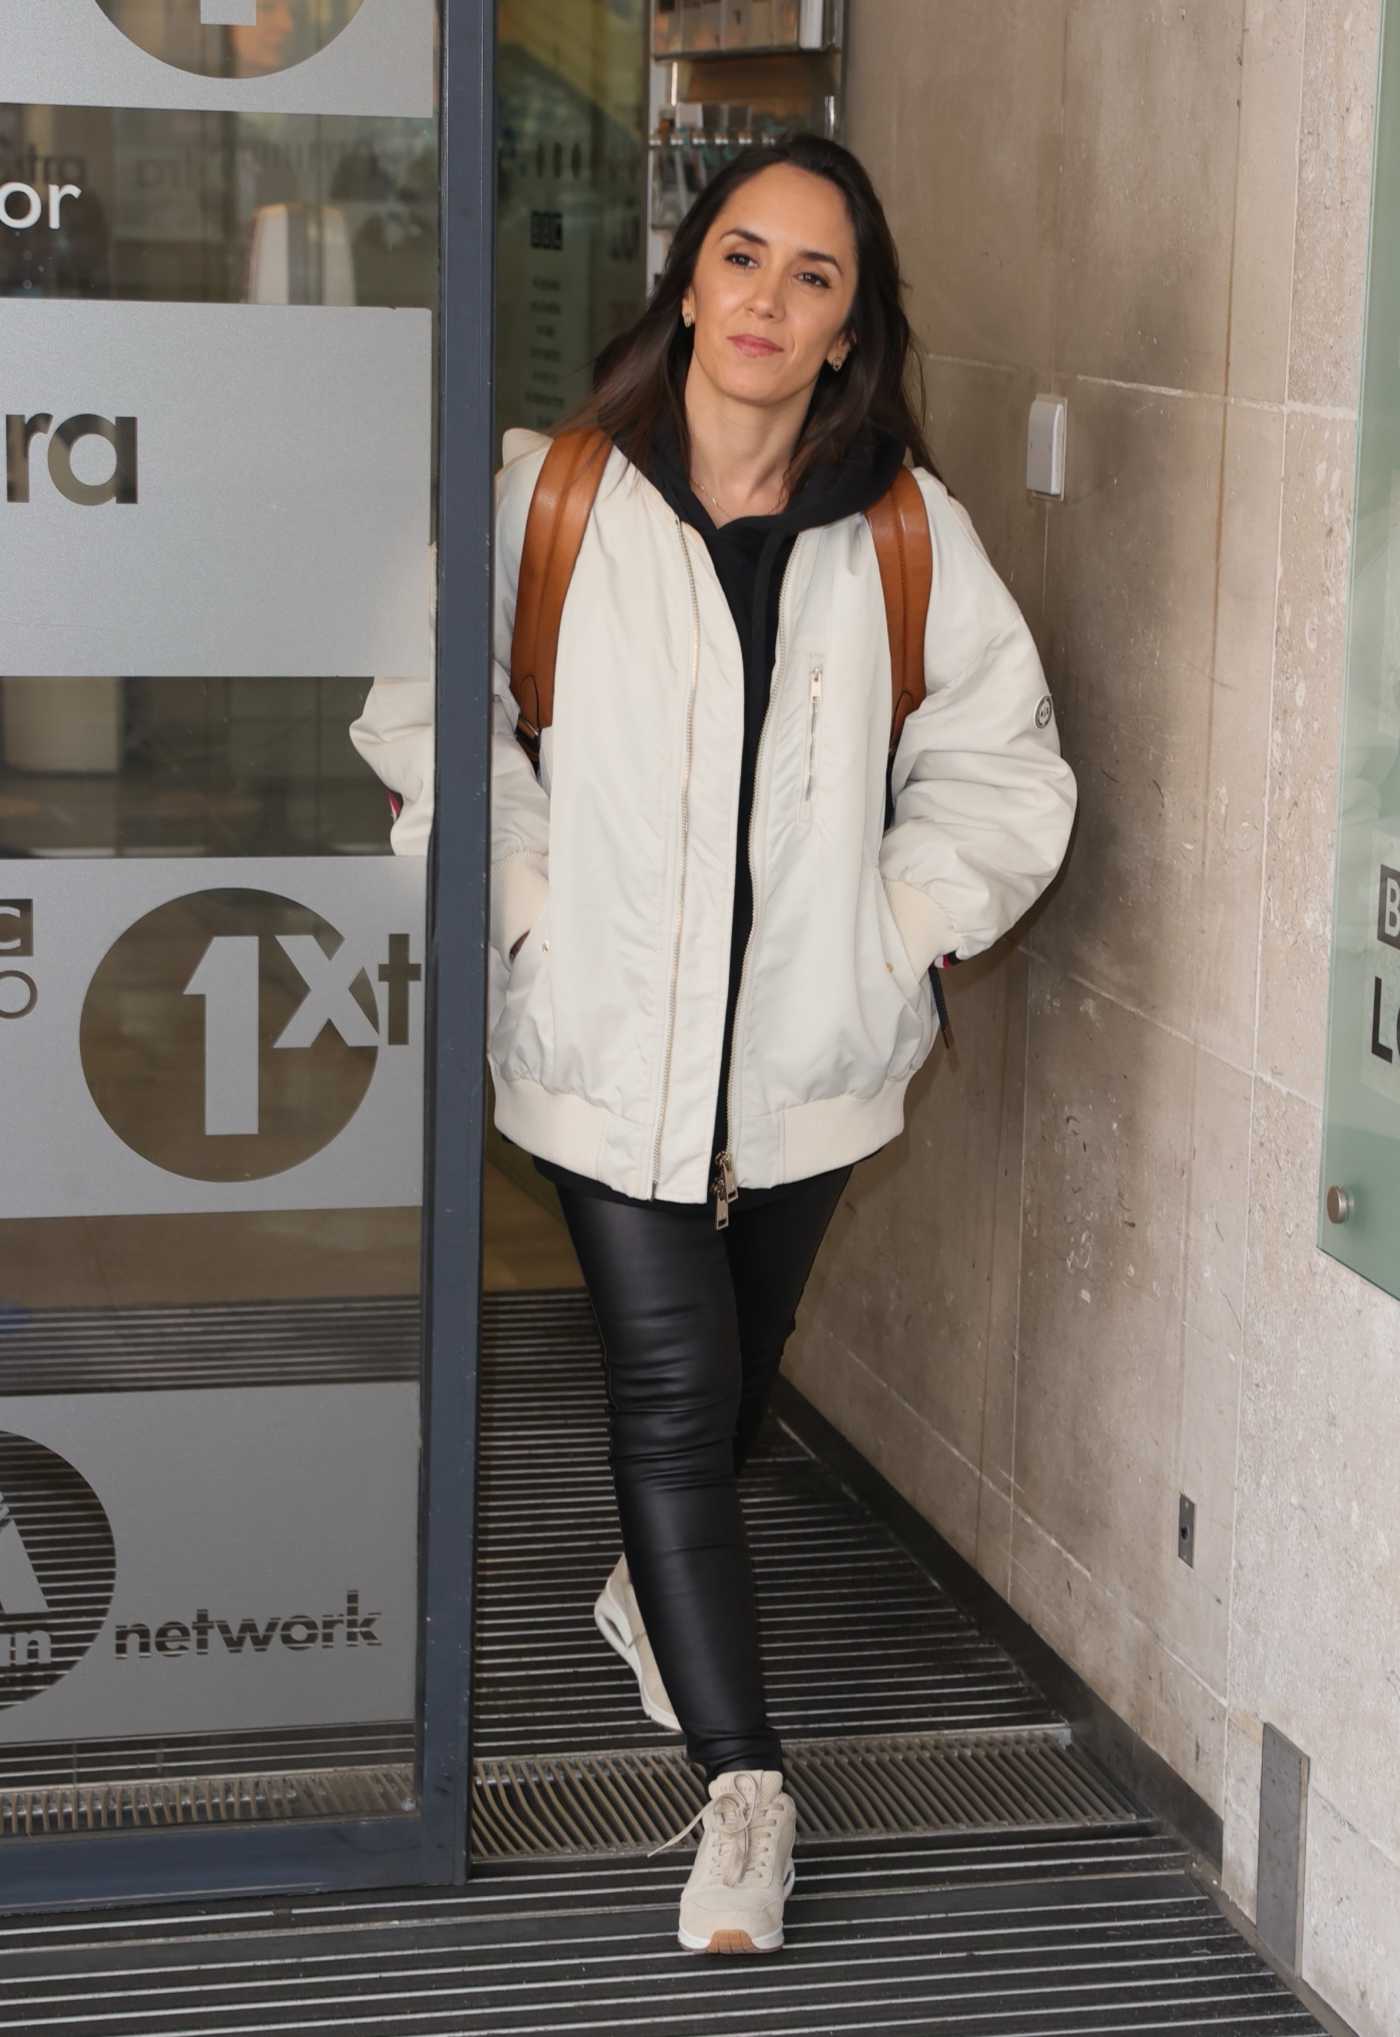 Janette Manrara in a White Jacket Arrives on Morning Live in London 04/14/2021